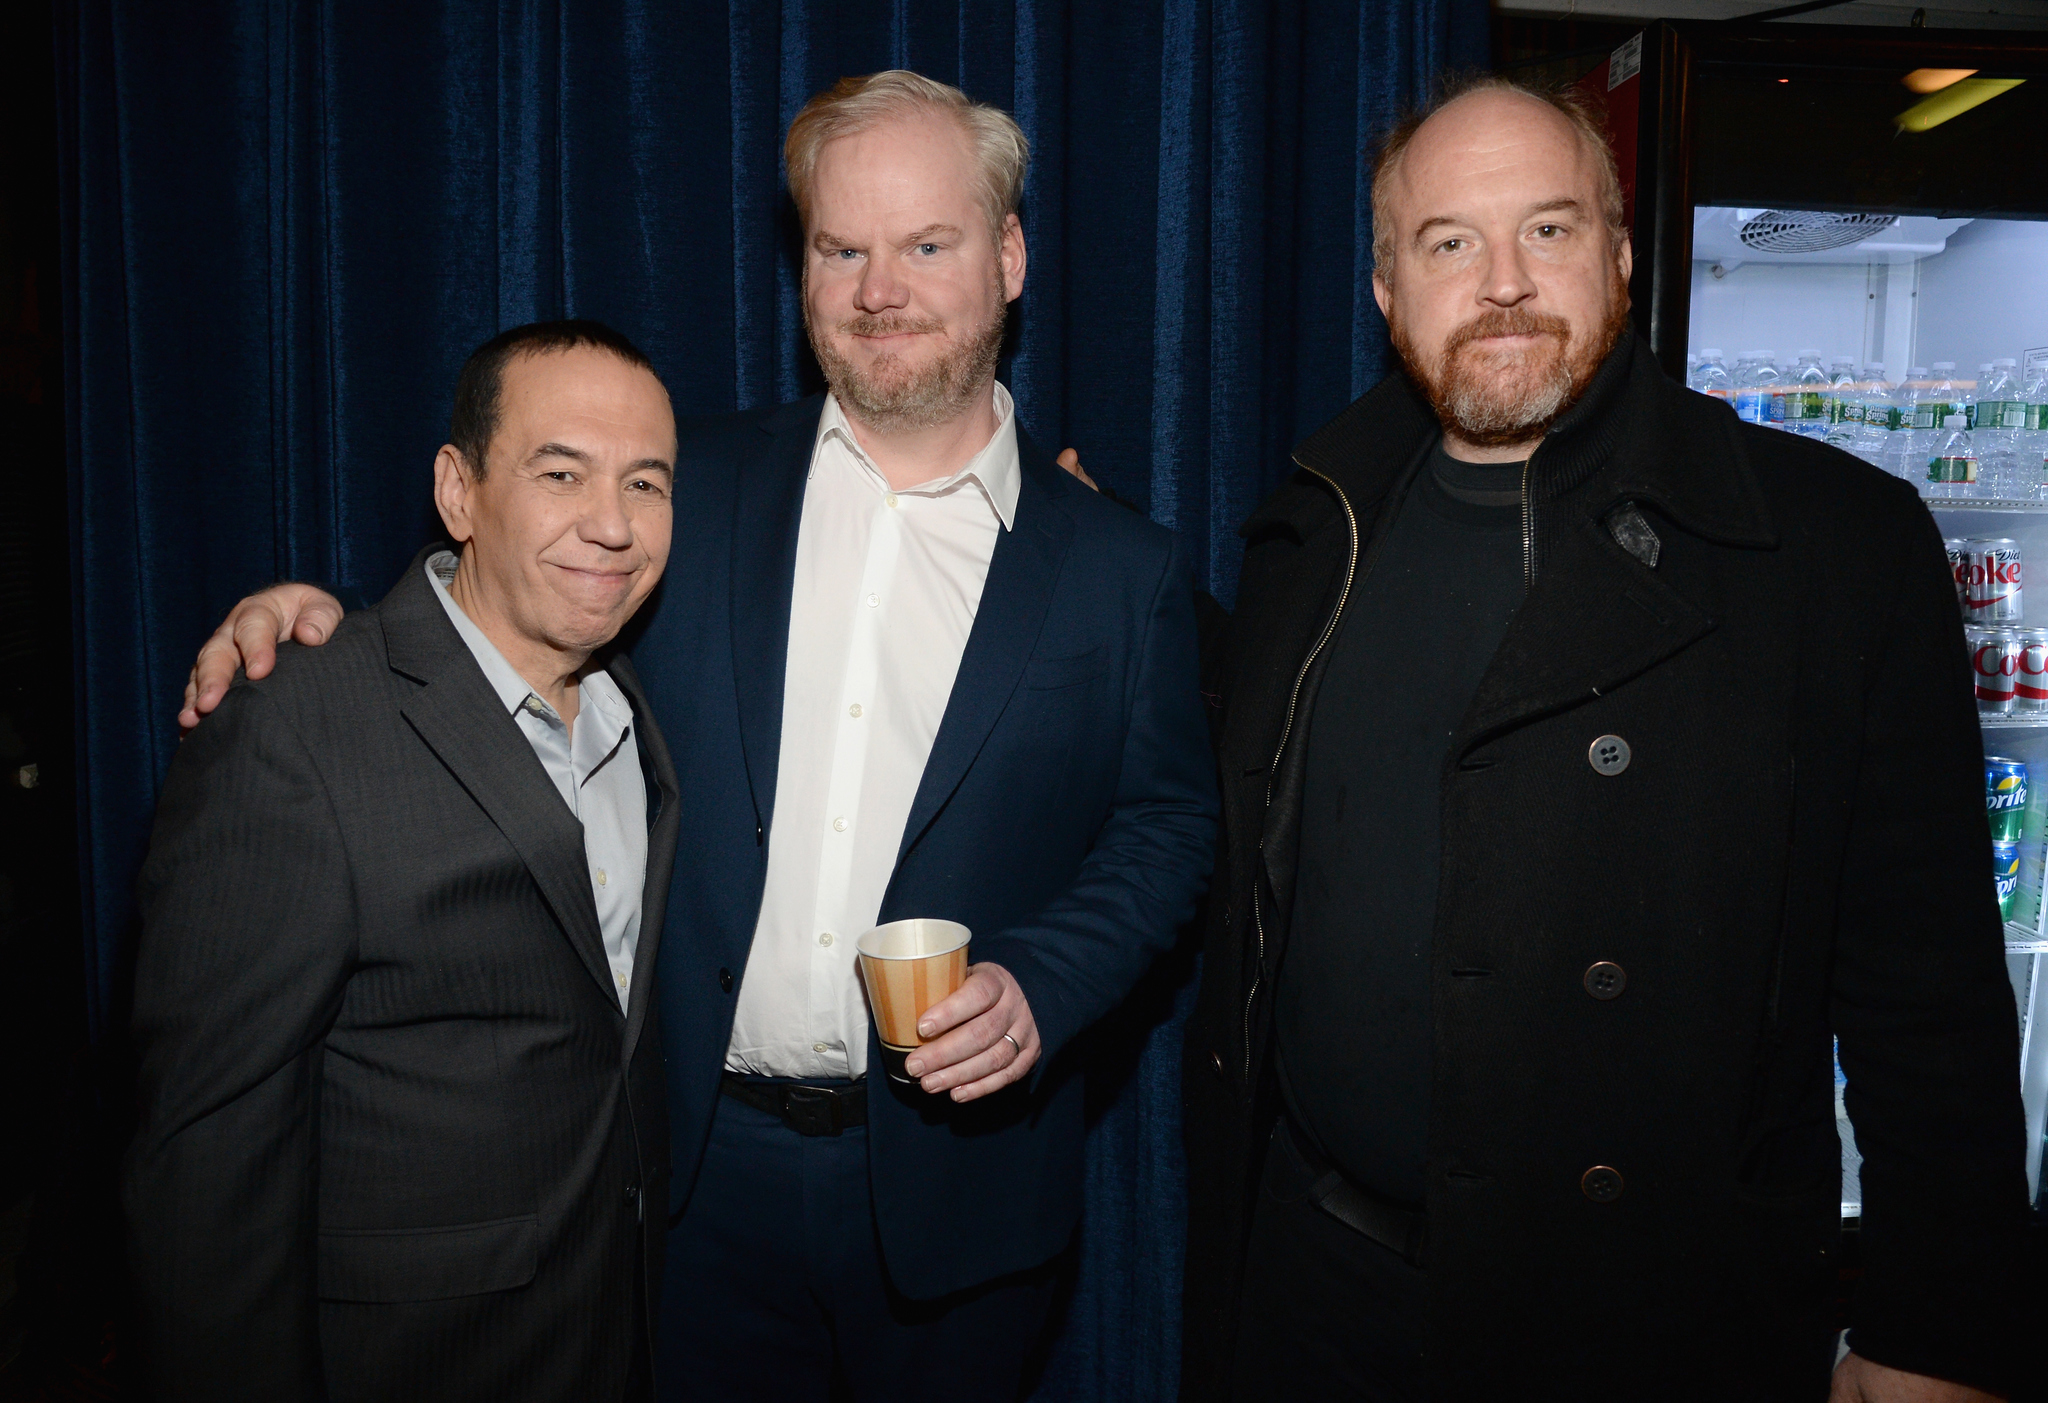 Louis C.K., Jim Gaffigan and Gilbert Gottfried at event of Night of Too Many Stars: America Comes Together for Autism Programs (2015)